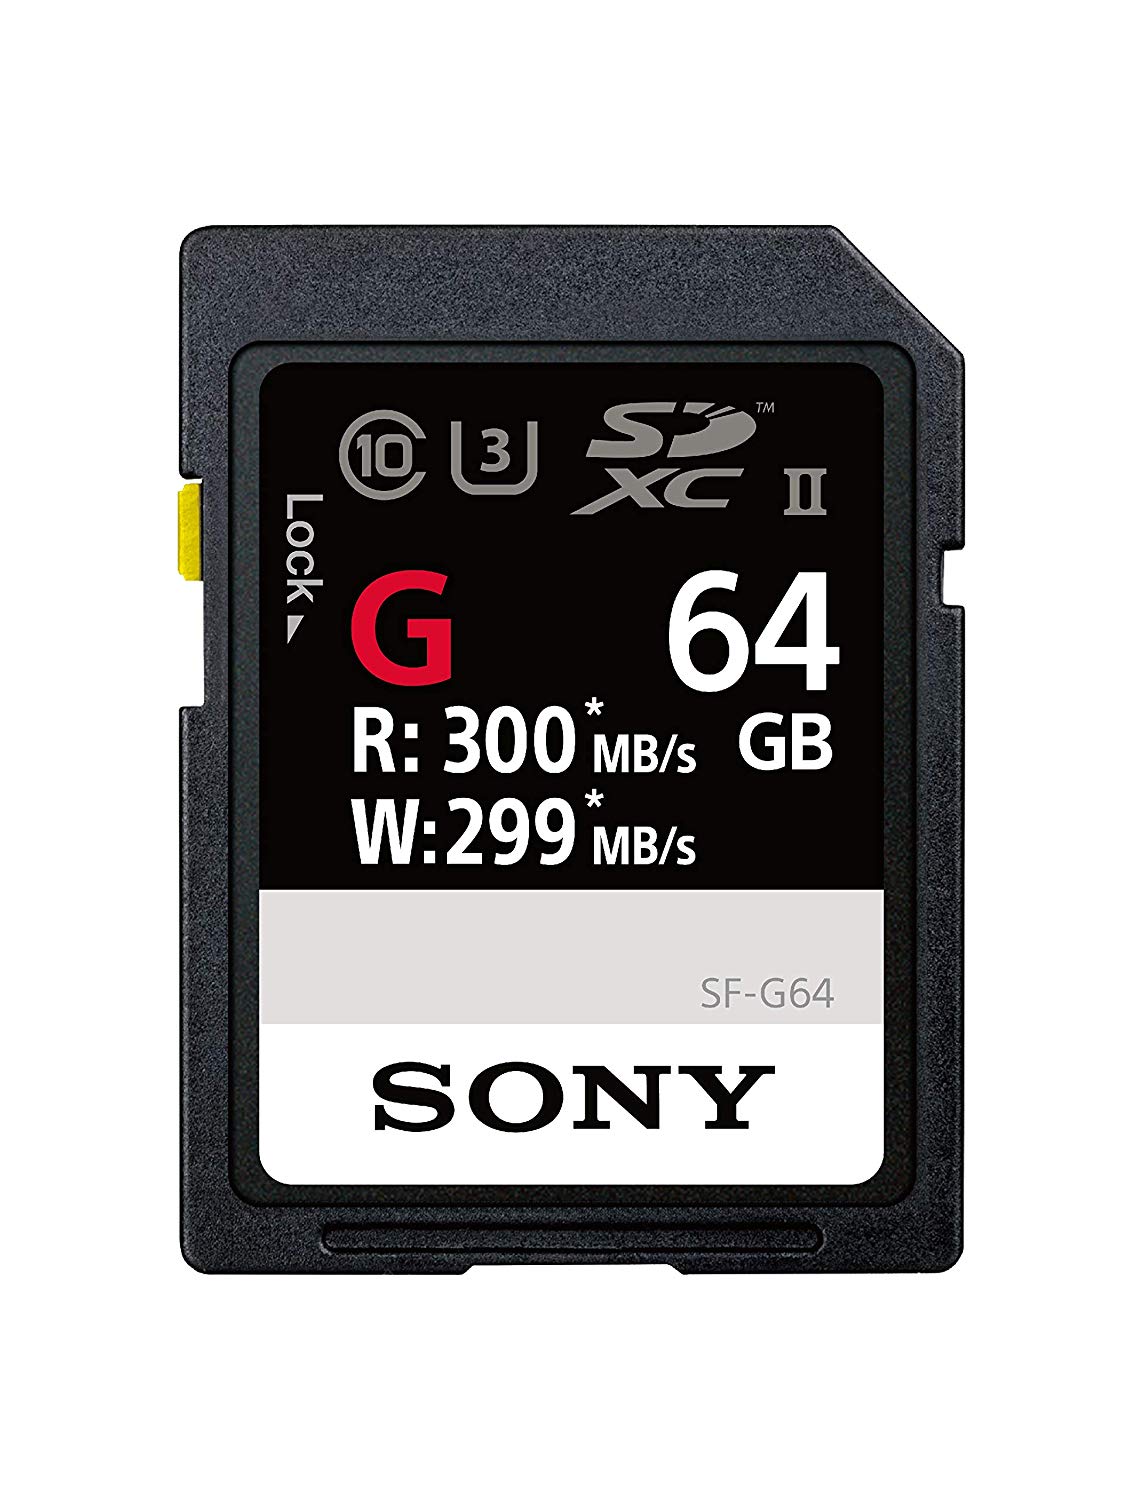 best sd card currently available 2019 image 